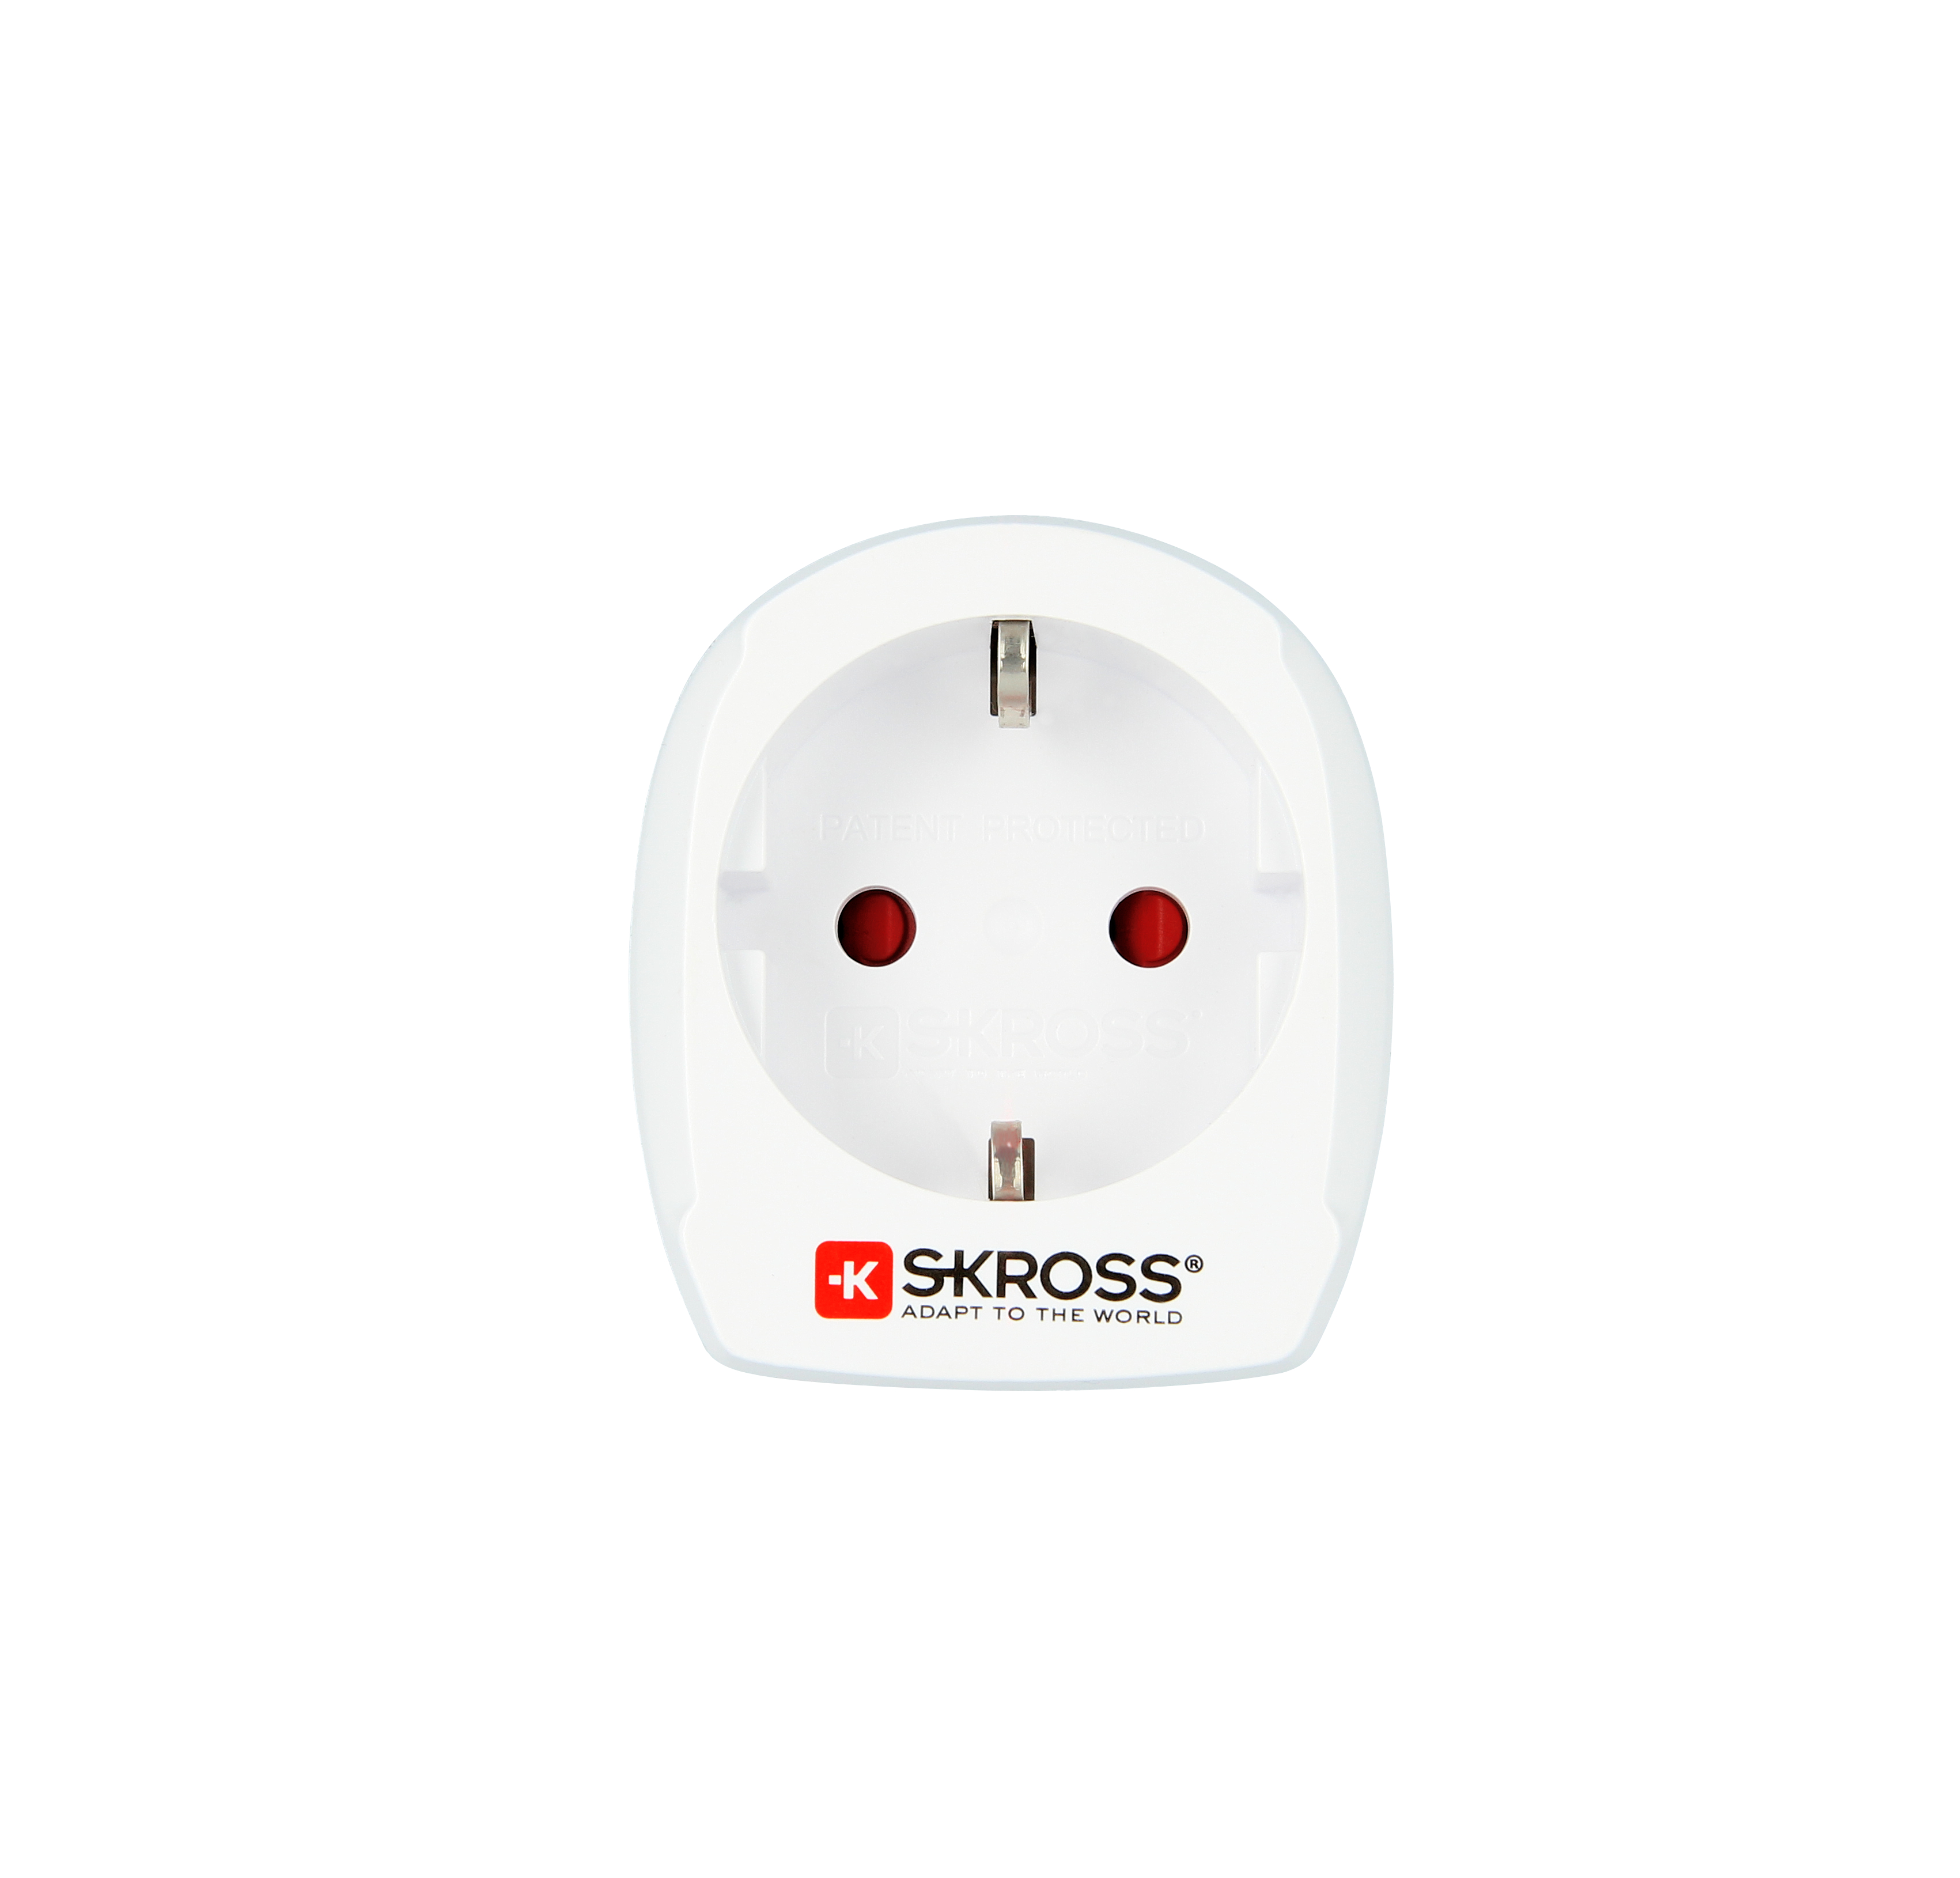 SKROSS Country Travel Adapter 1.500205 Europe to CH Europe to CH